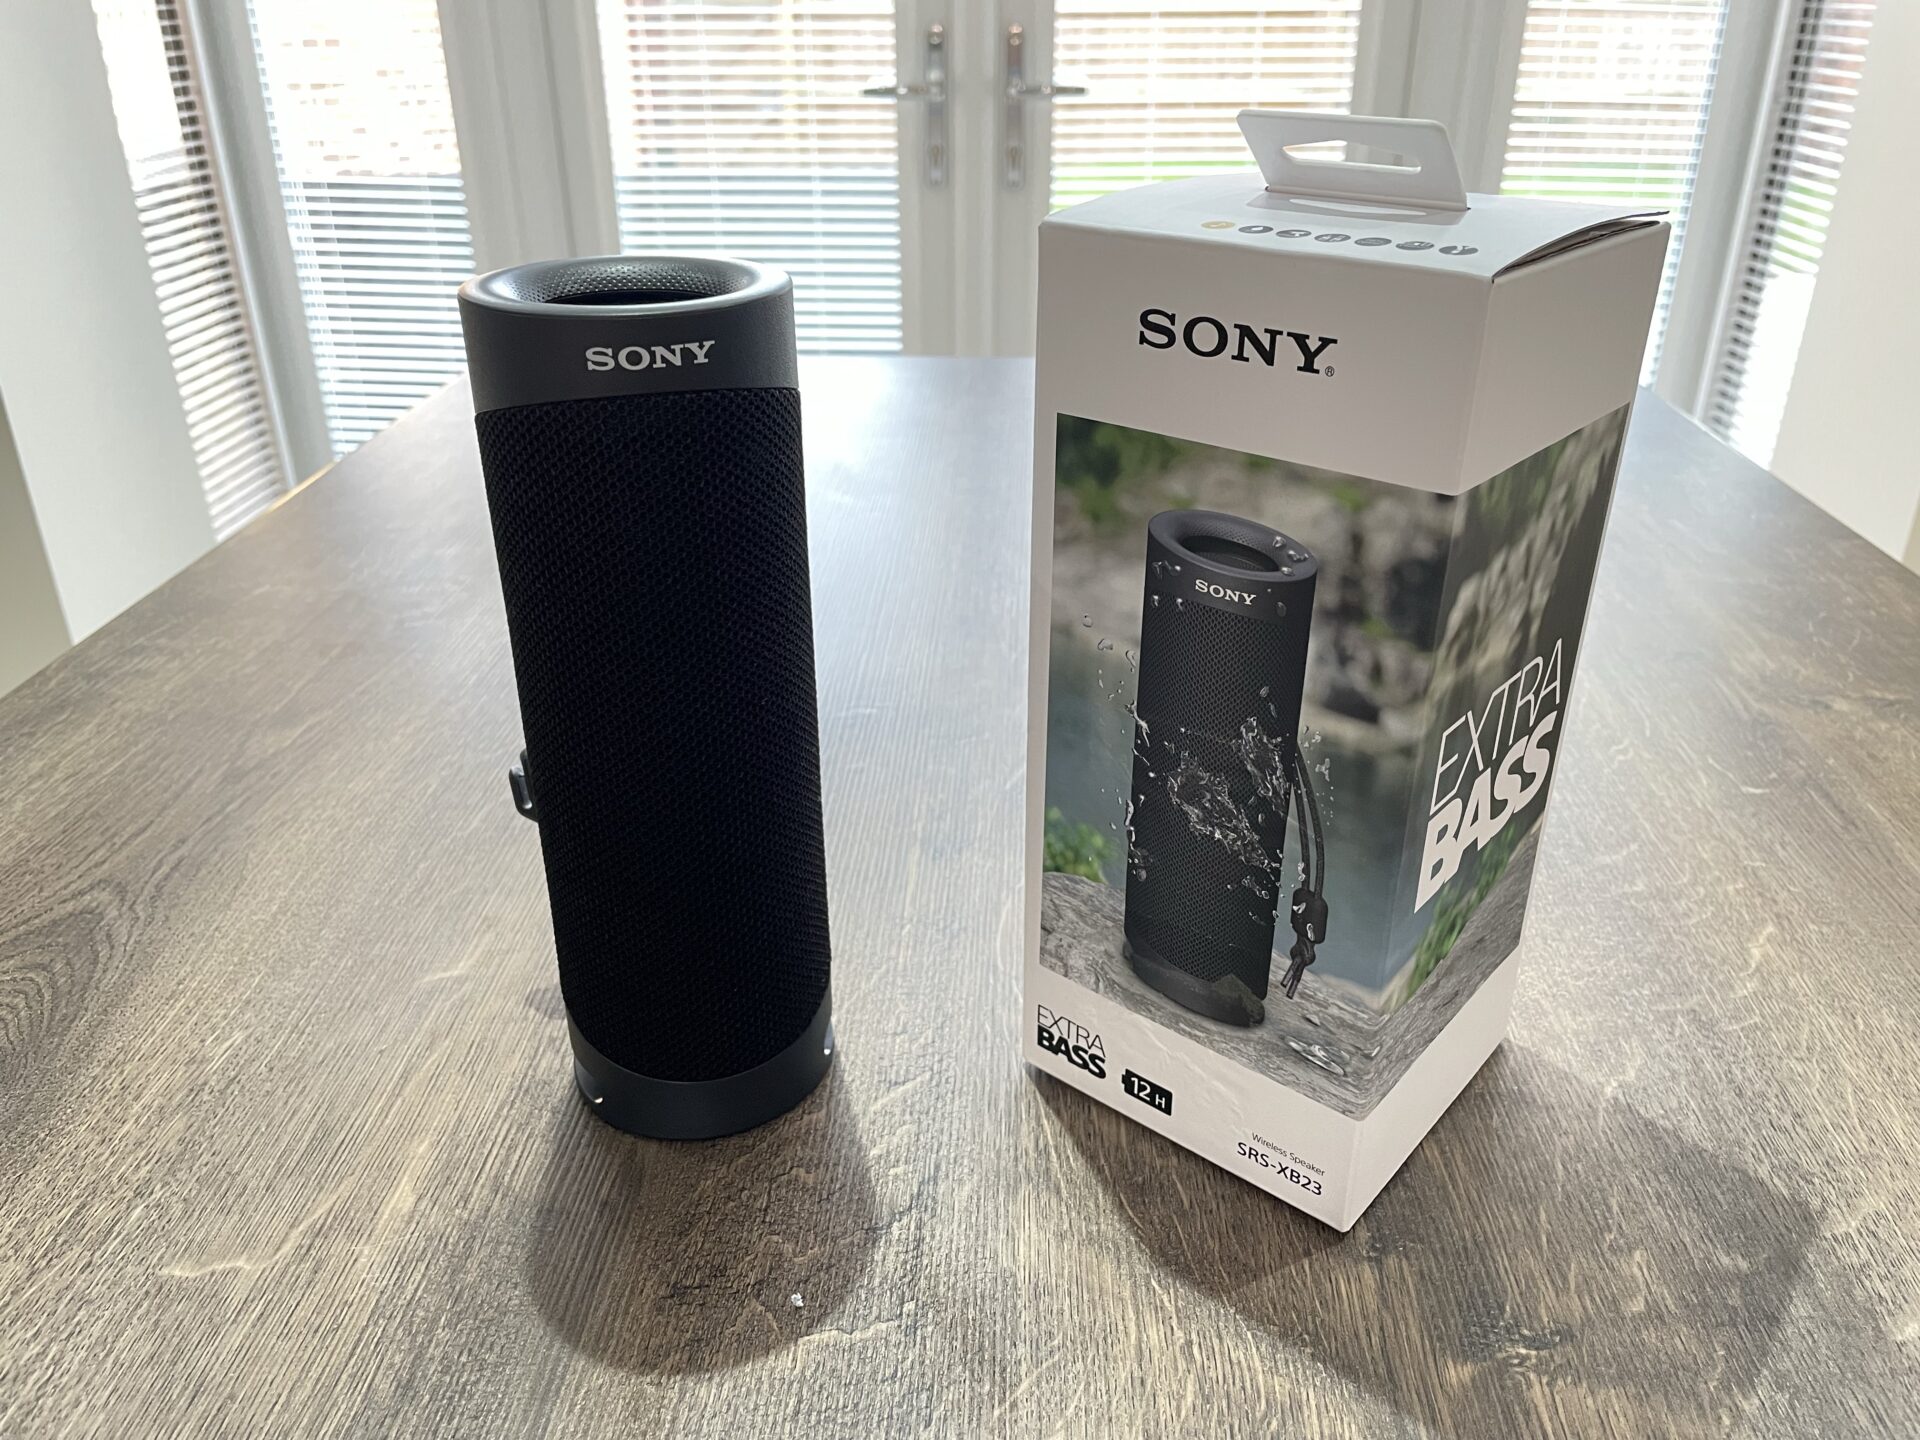 Sony SRS-XB23 Bluetooth Speaker Review - Life of Man